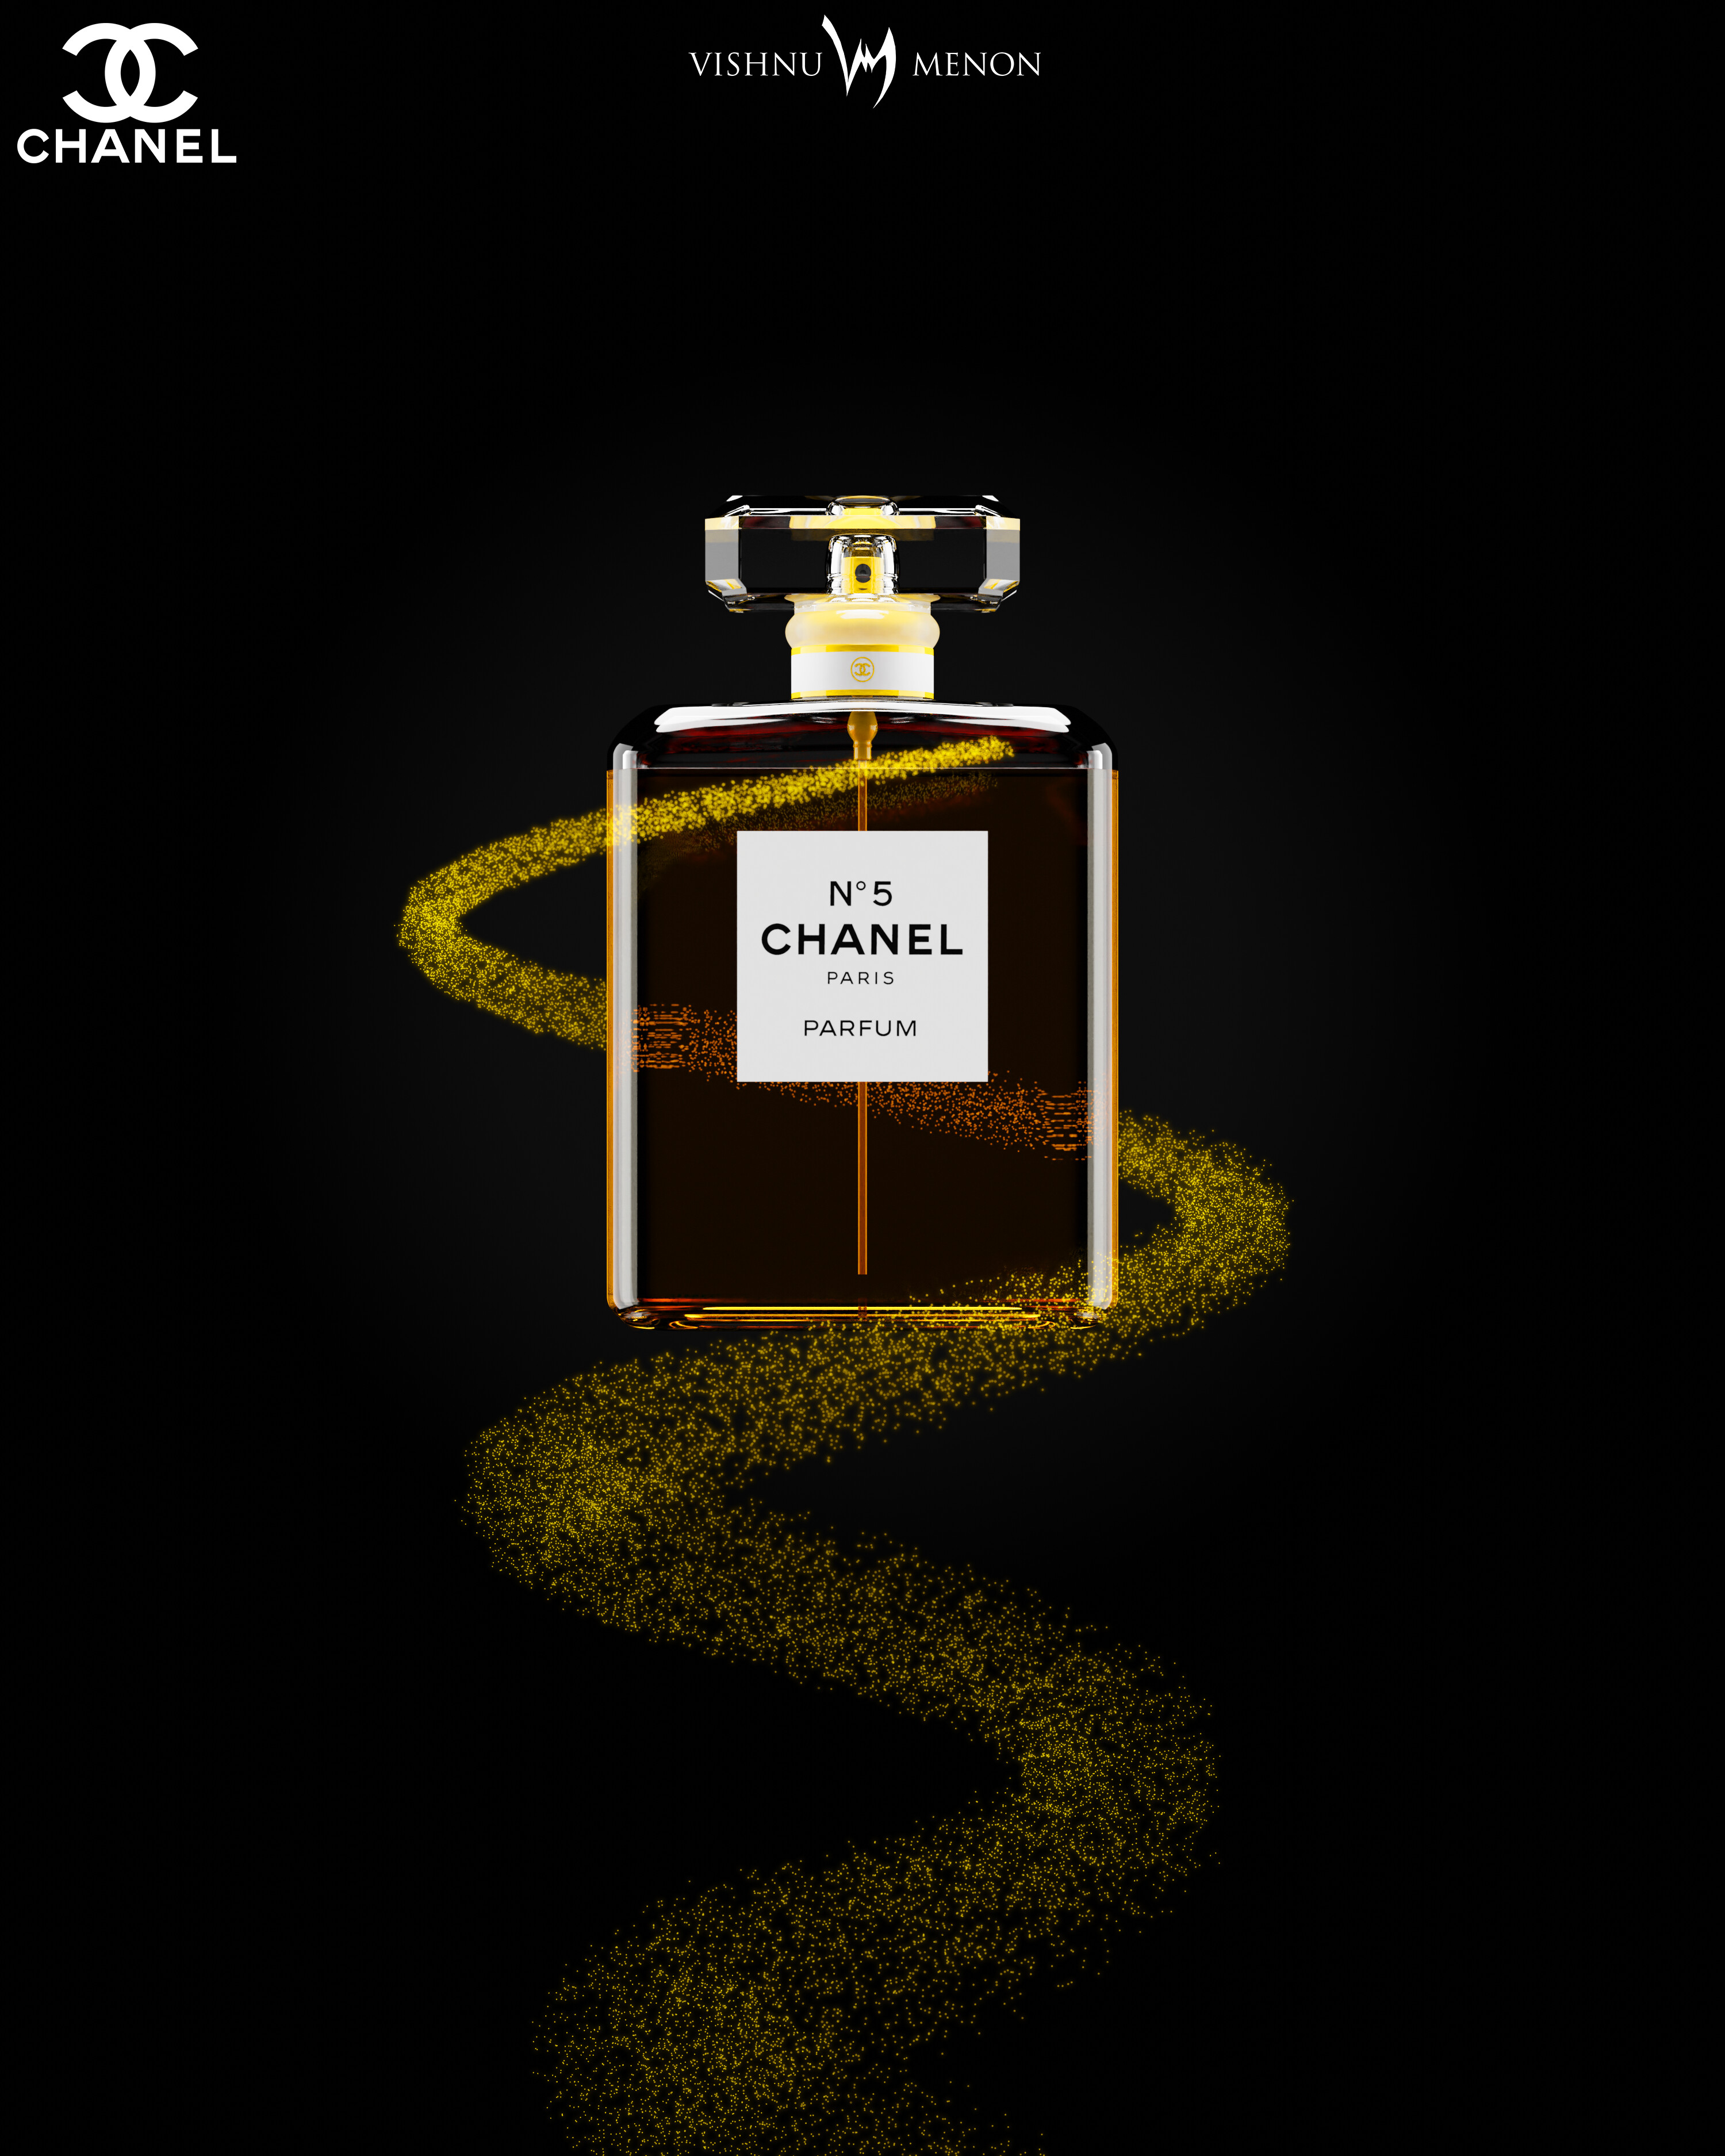 Chanel perfume product render - Finished Projects - Blender